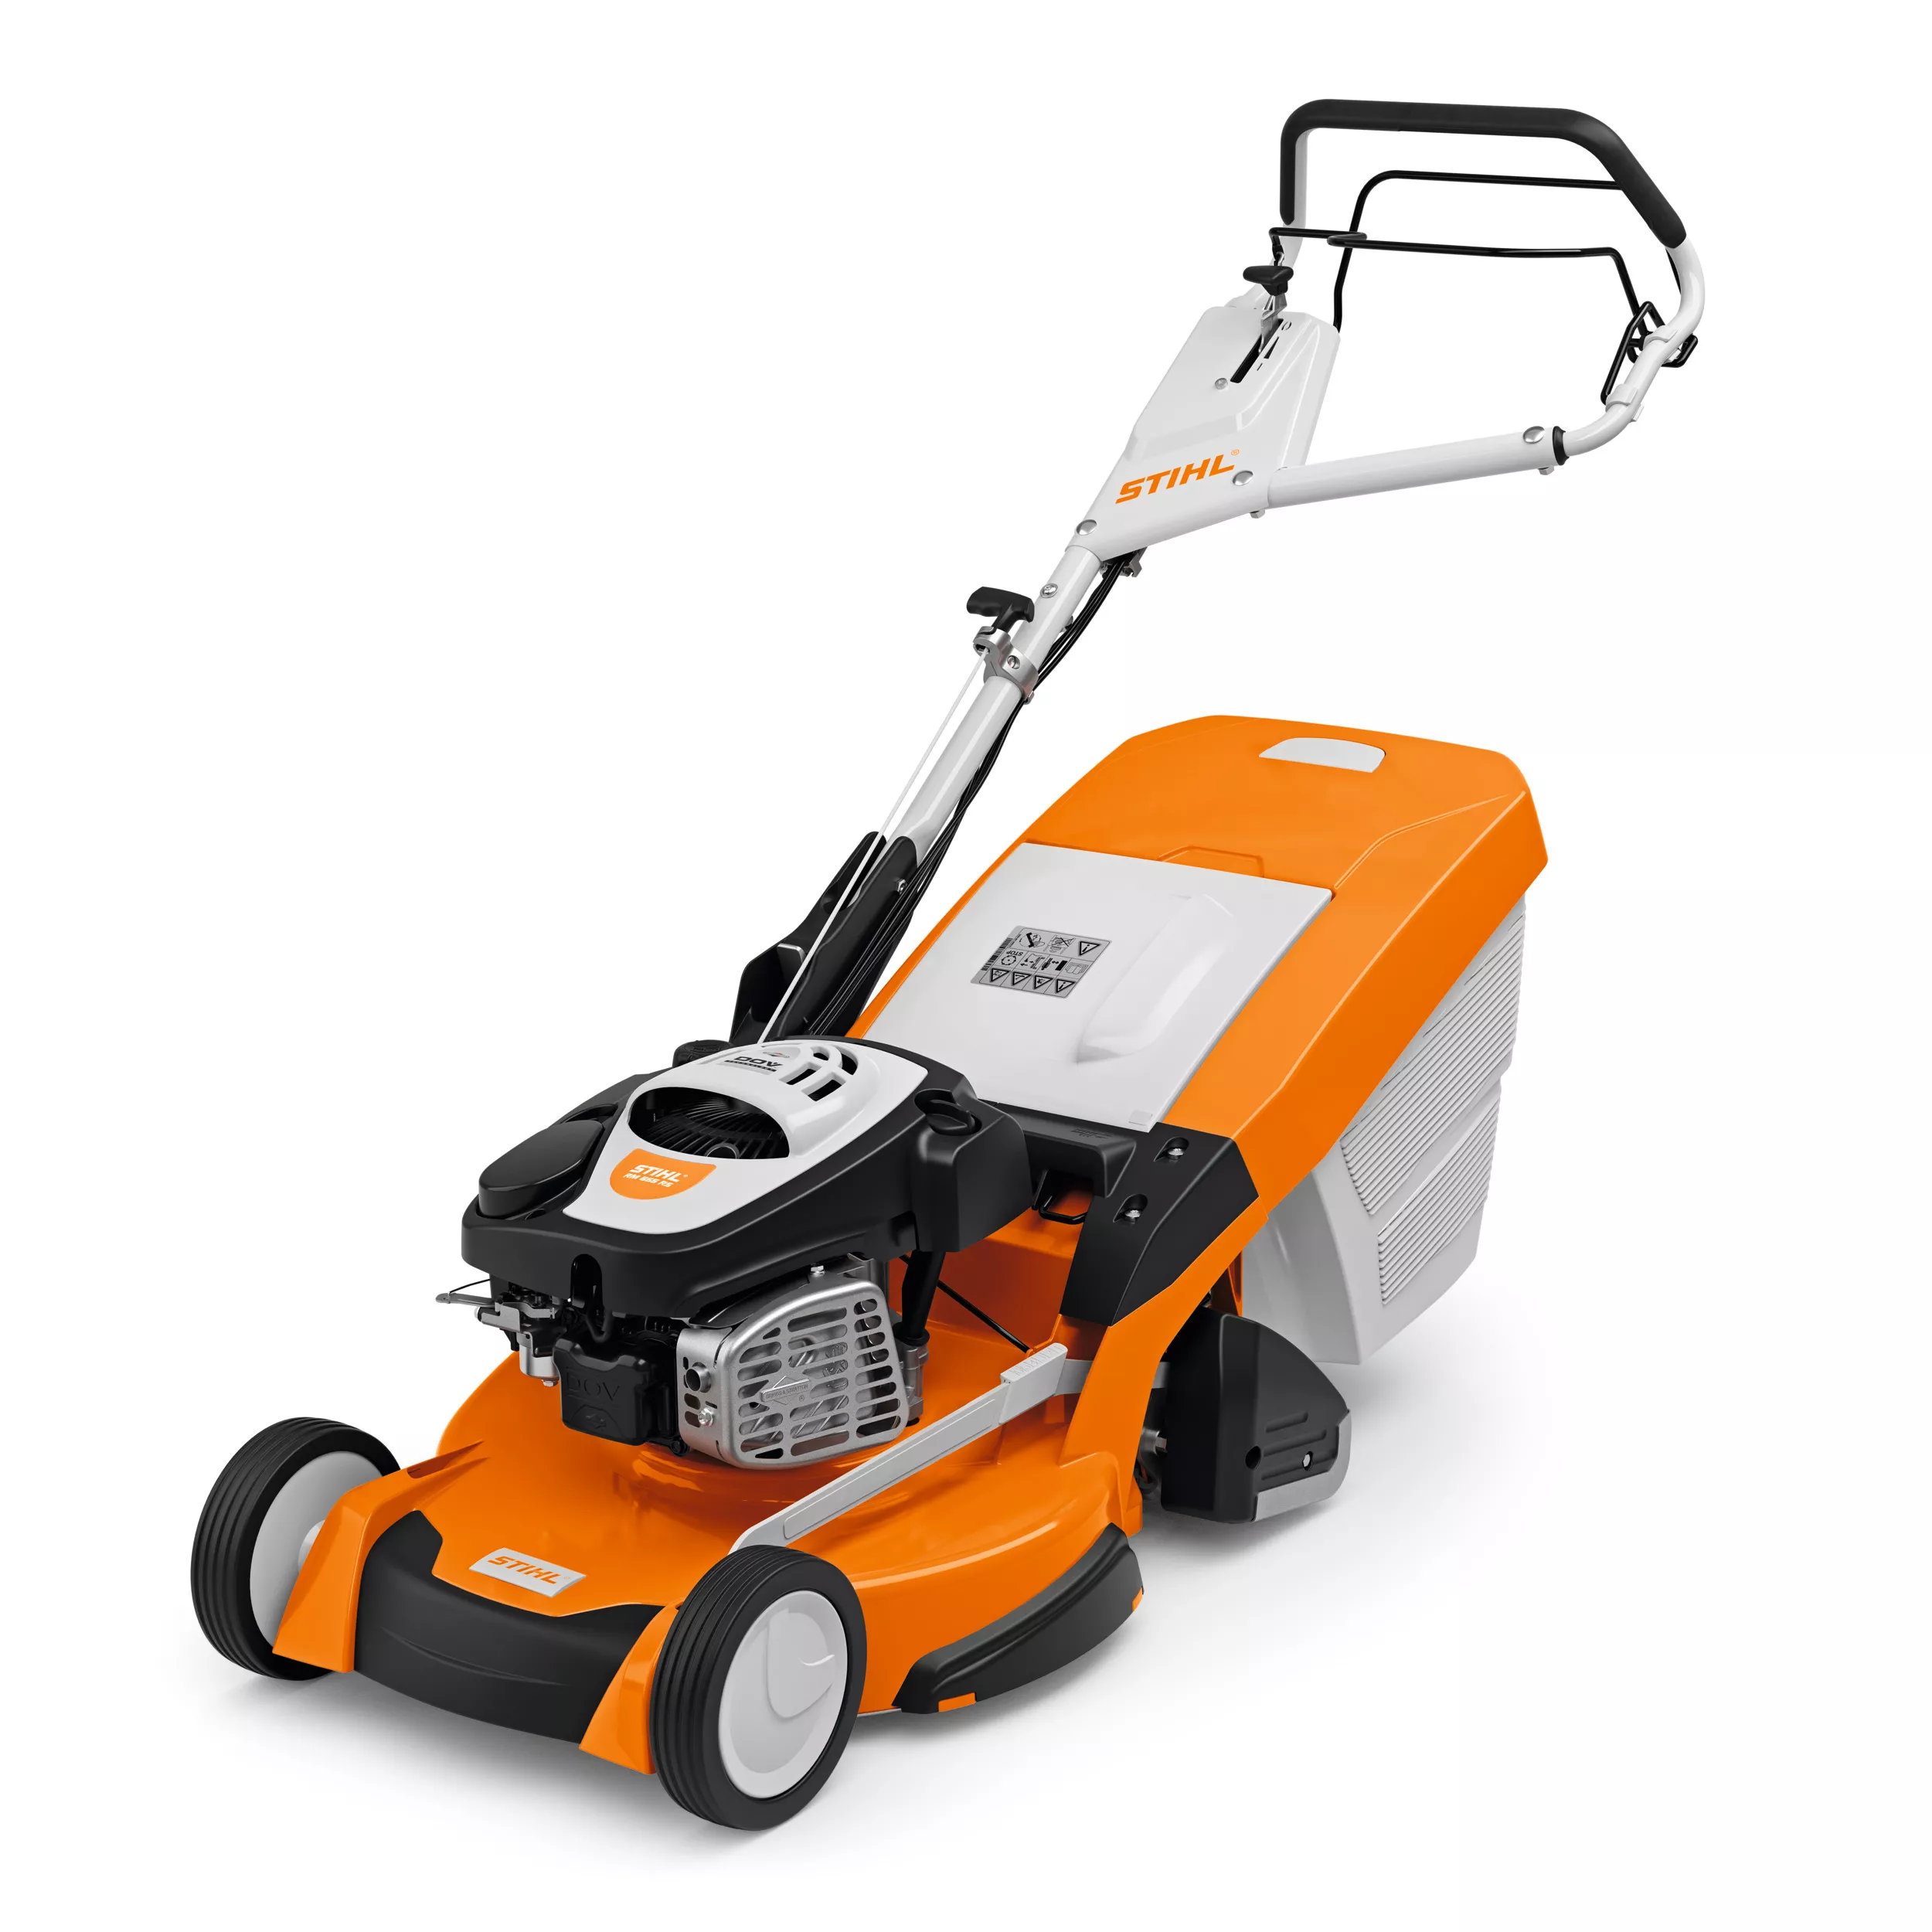 RM 655 RS Lawn Mower